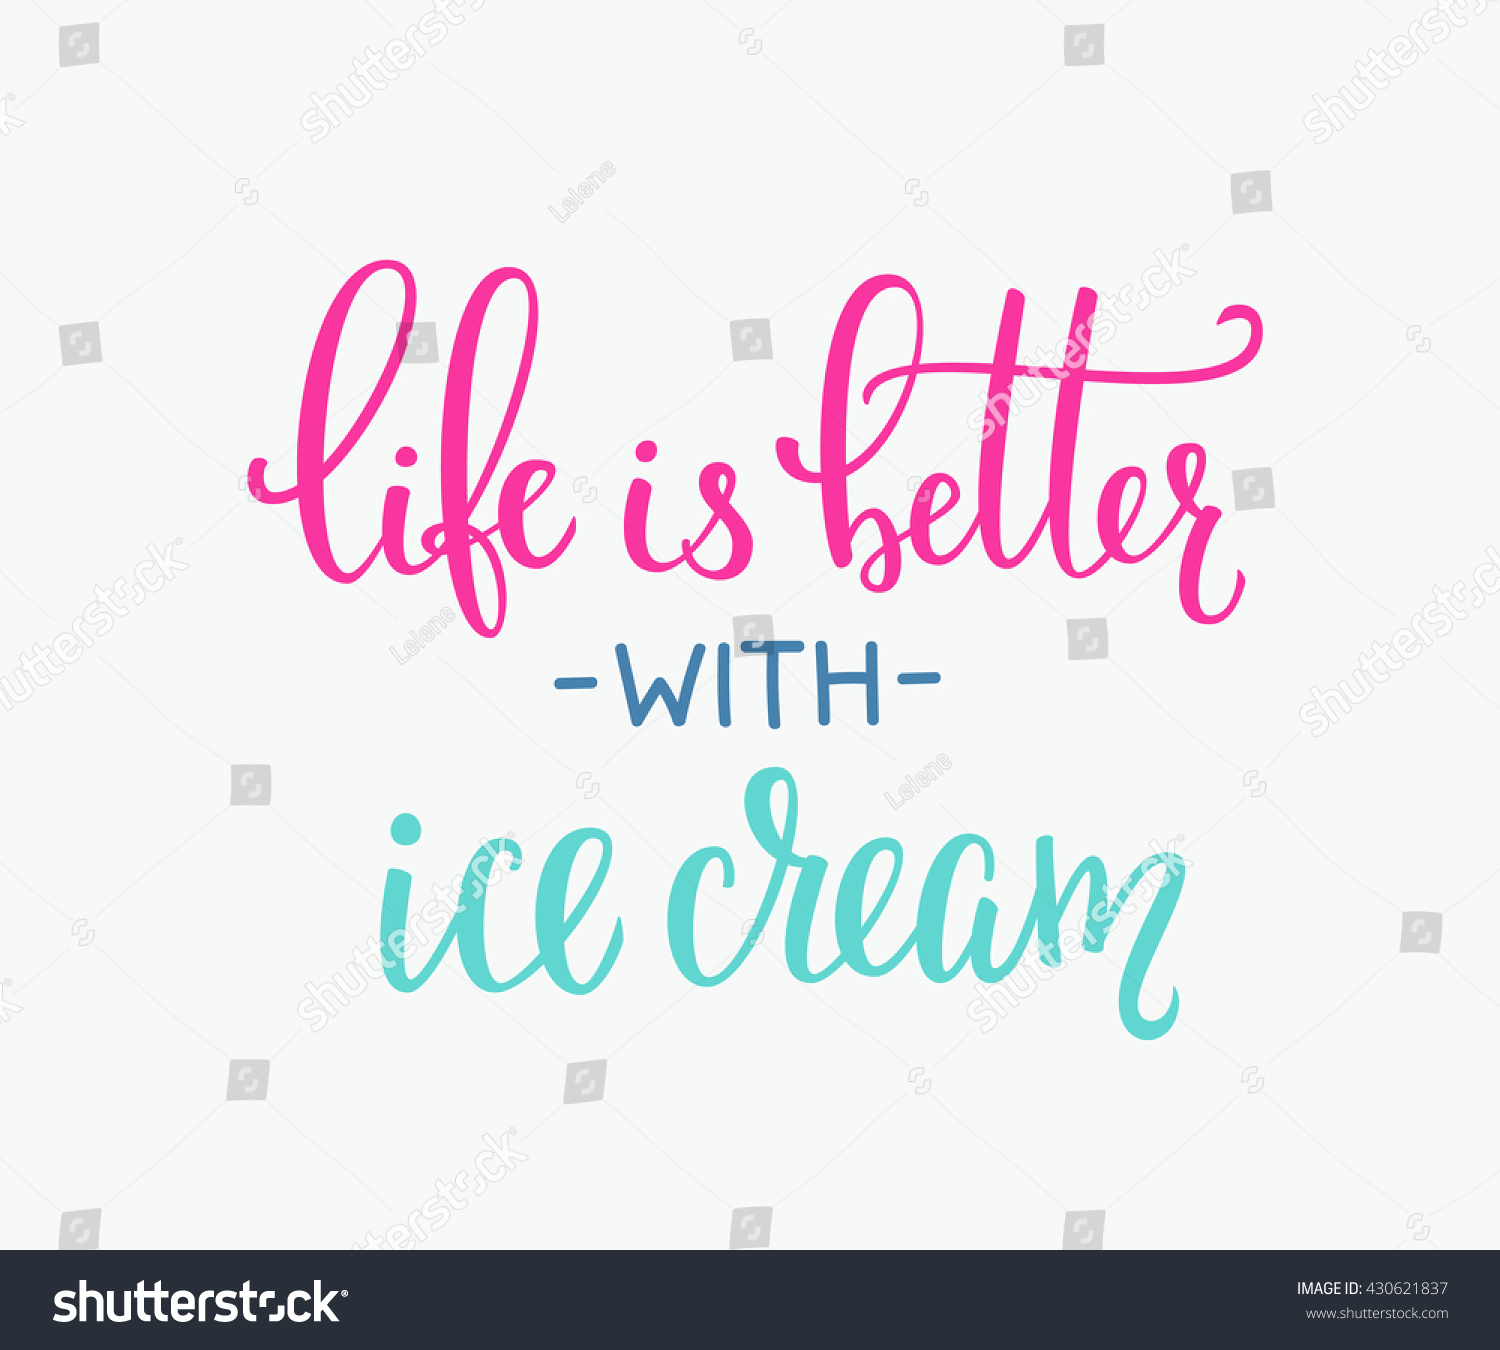 Life is better with ice cream quote lettering Calligraphy inspiration graphic design typography element